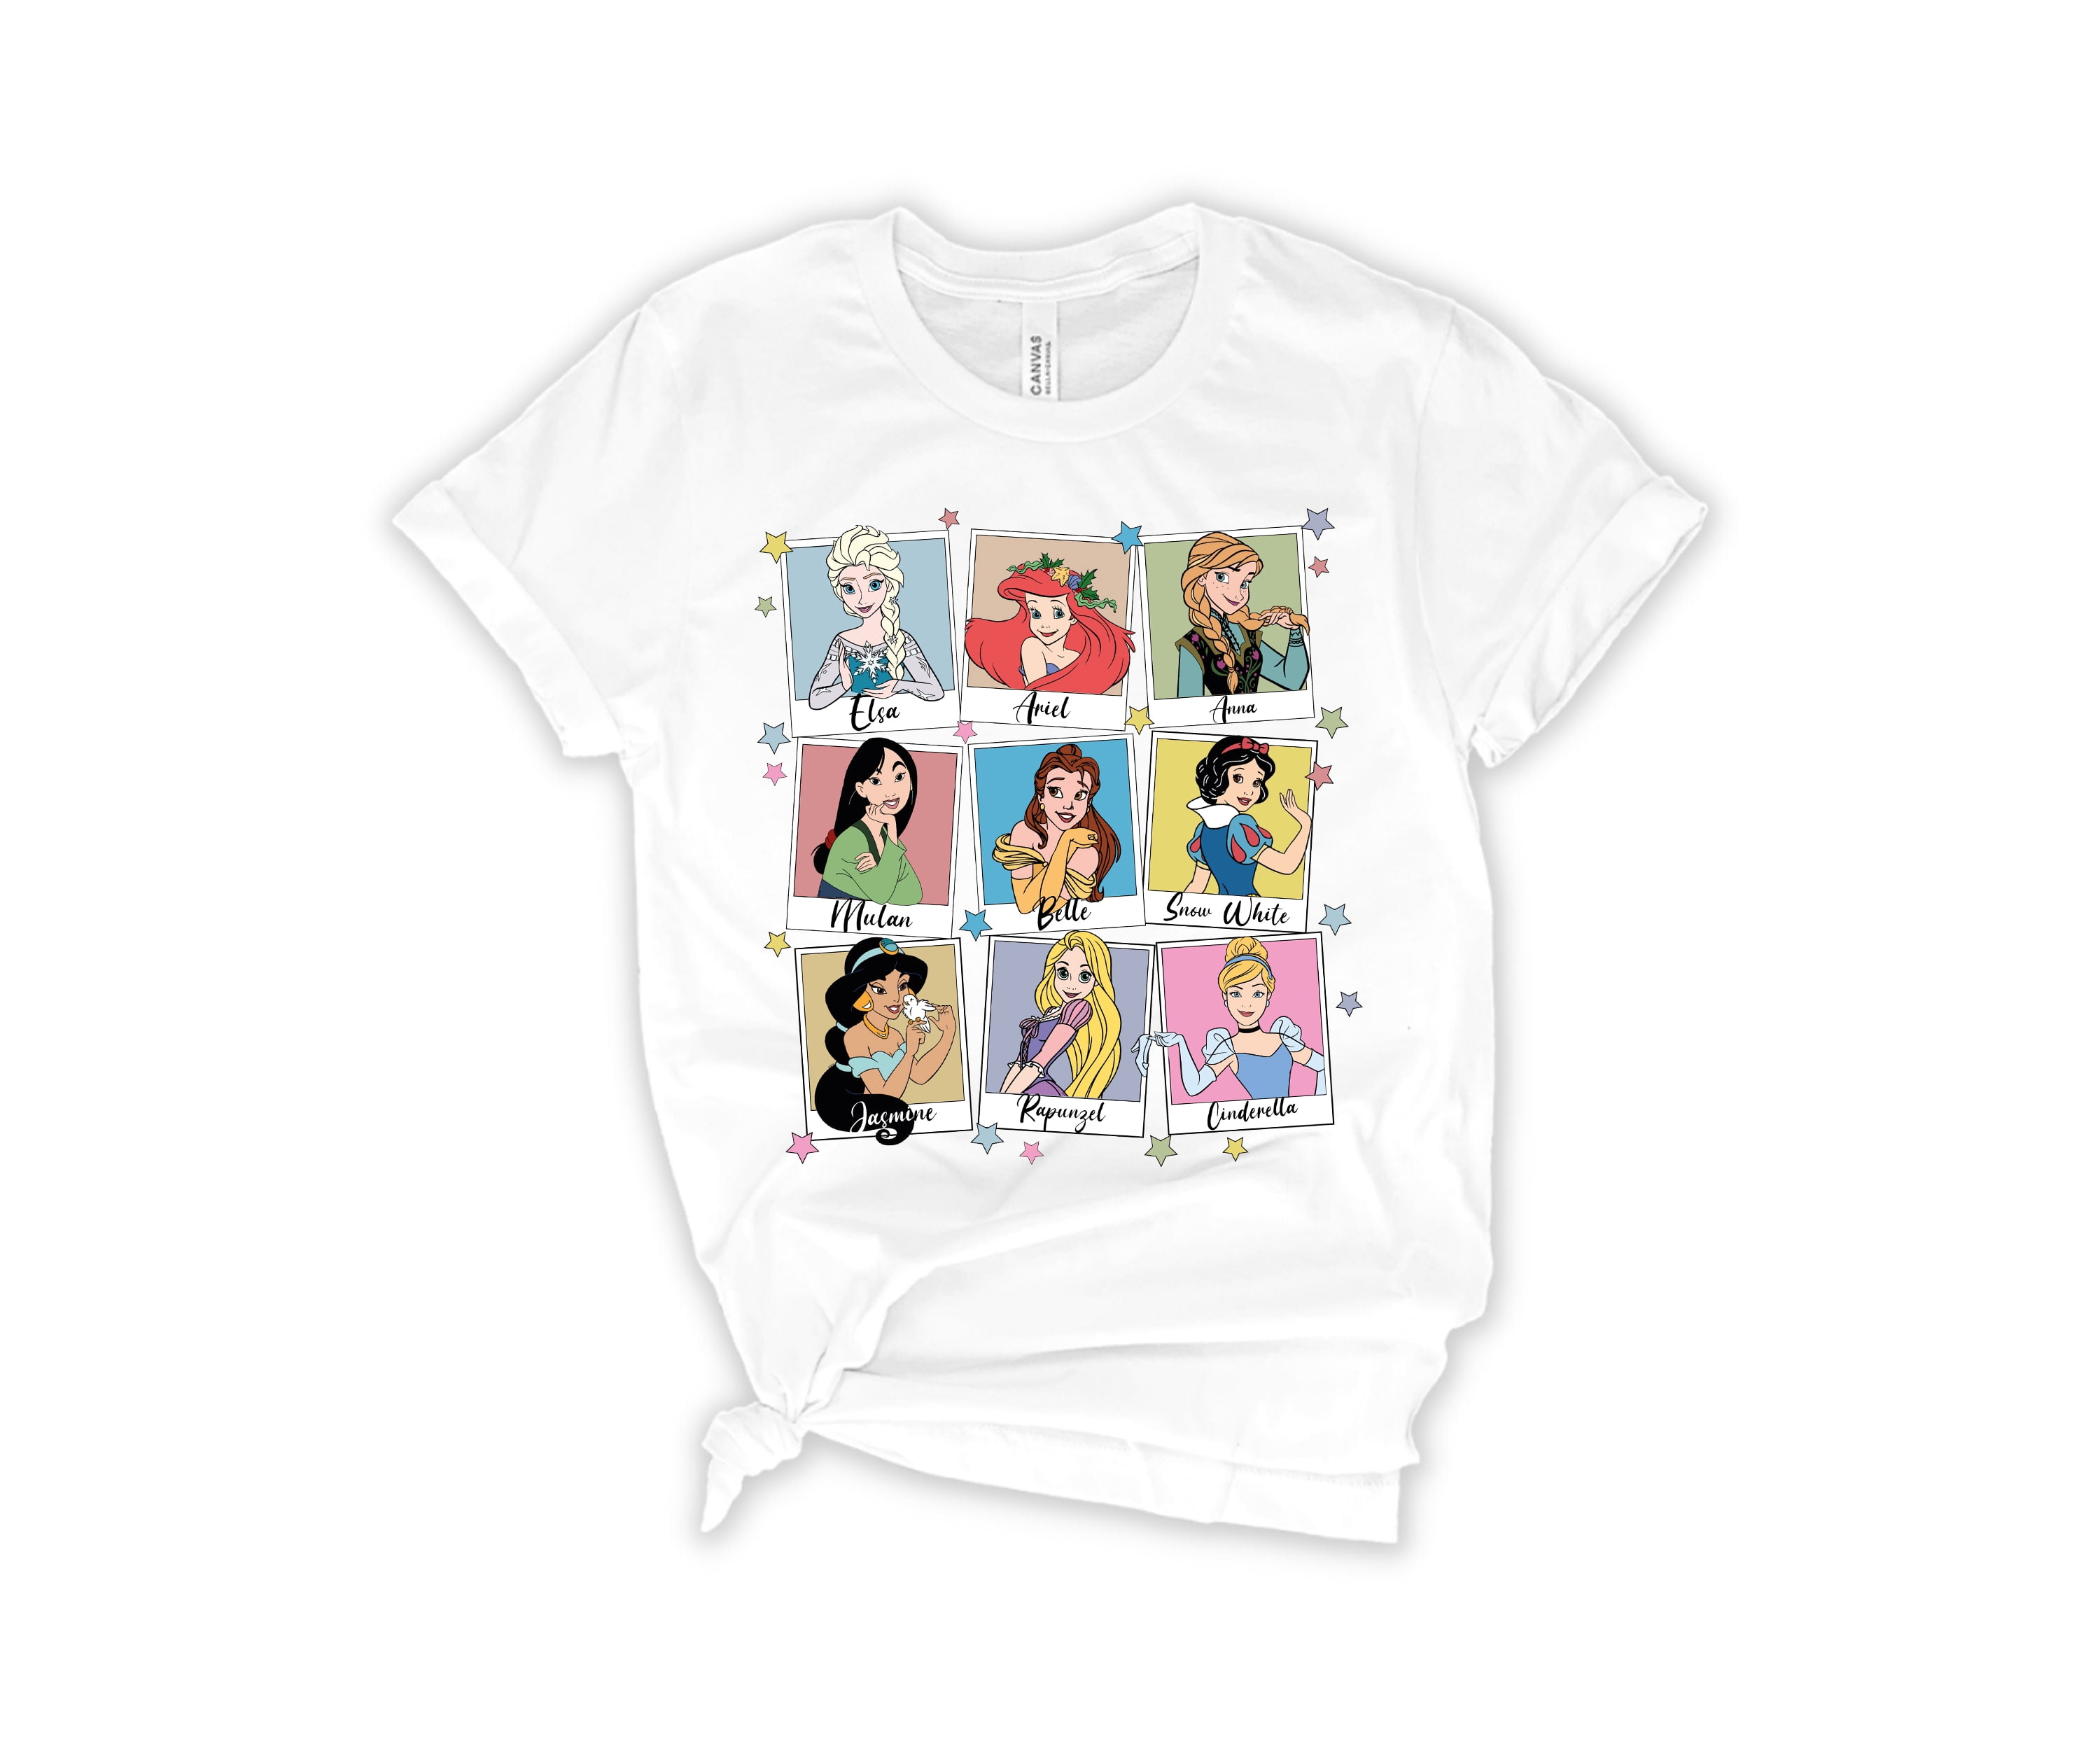 Adults Cotton Sleeve - - for Ocean Heather Shirt of Customized-Athletic An T- Ariel Short The Dreams Disney Mermaid Little